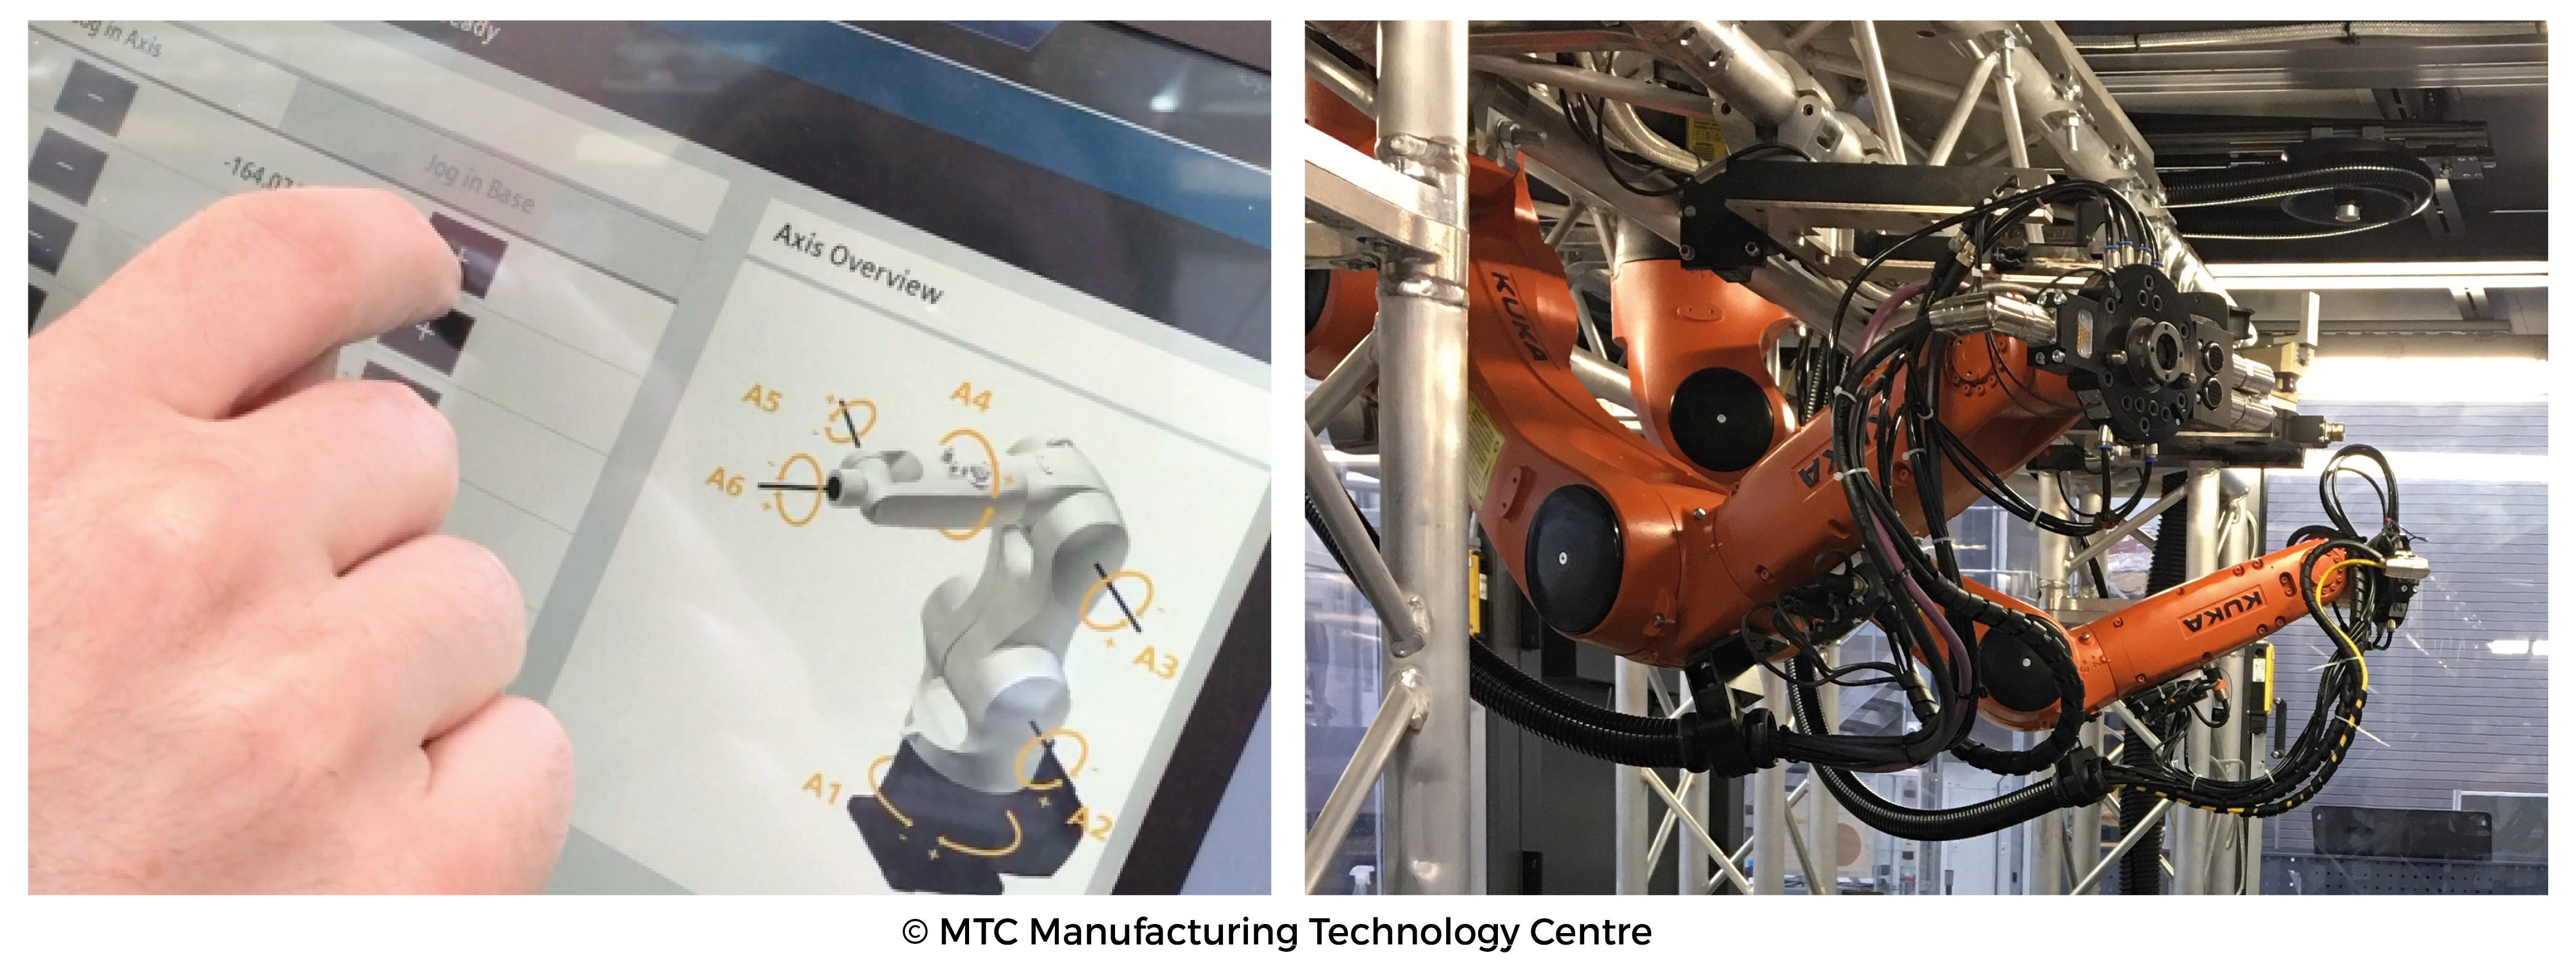 Human-robot-co-working image from MTC